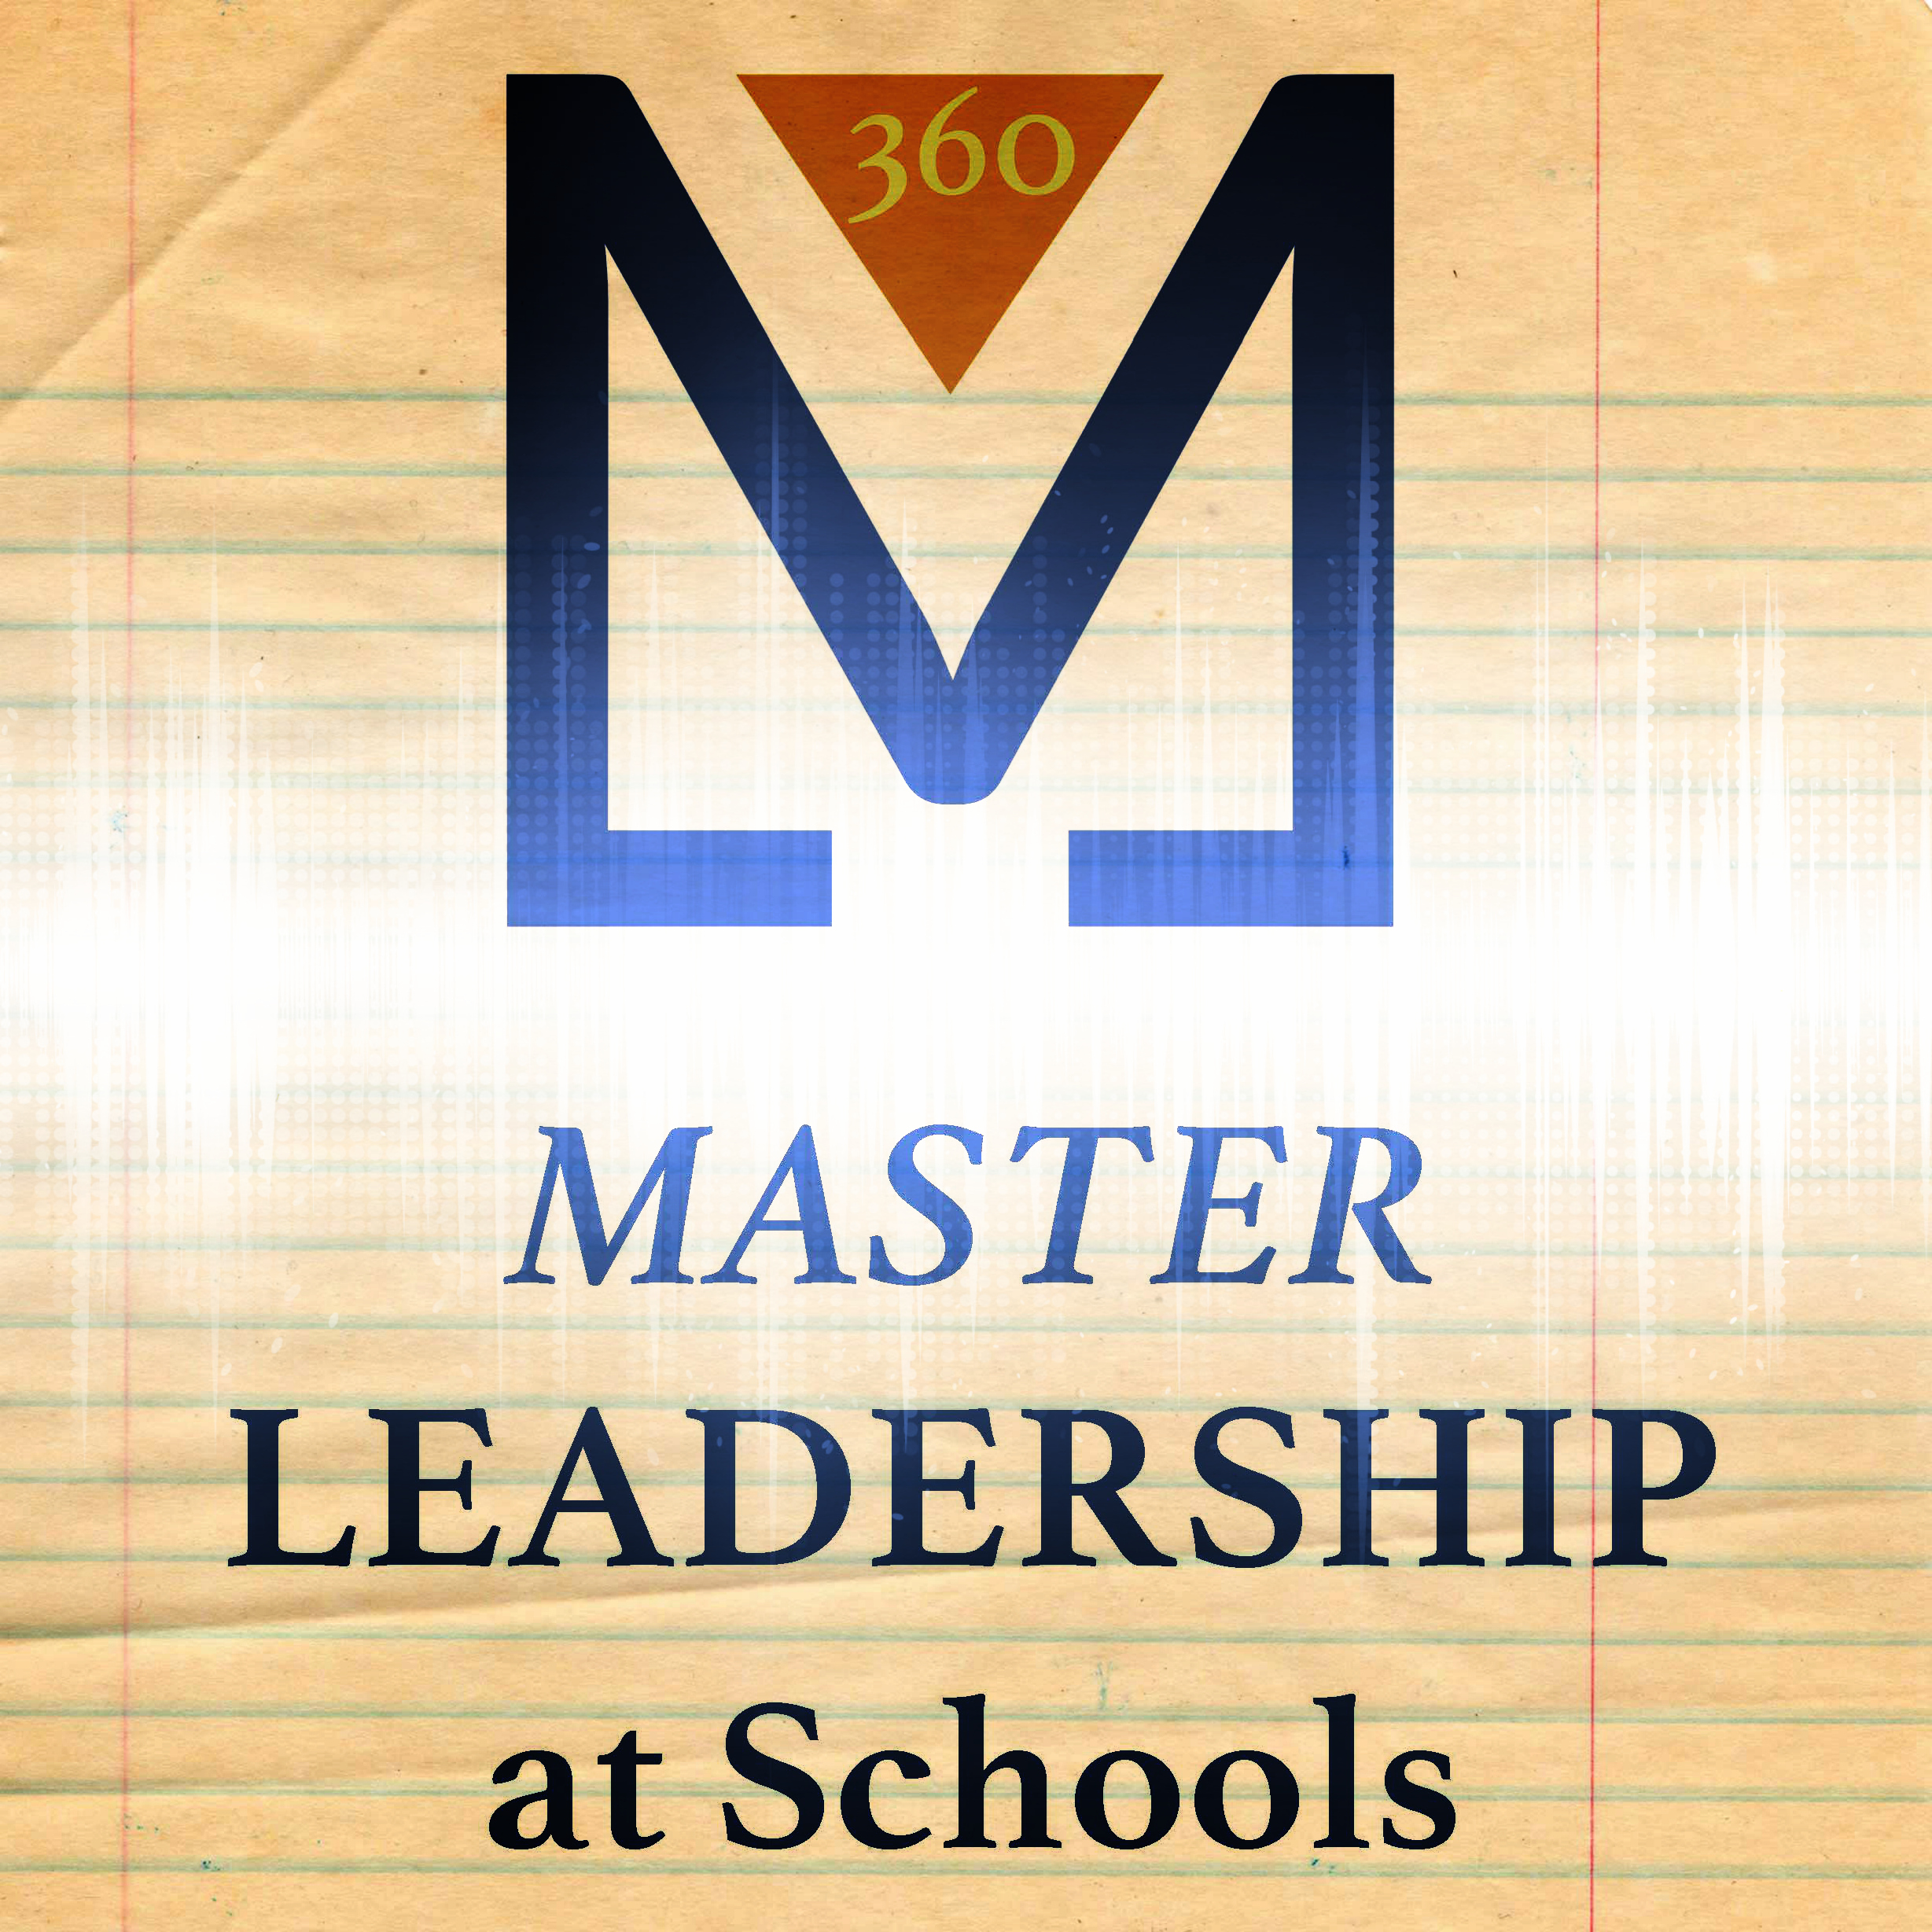 Master Leadership take a journey towards greater significance